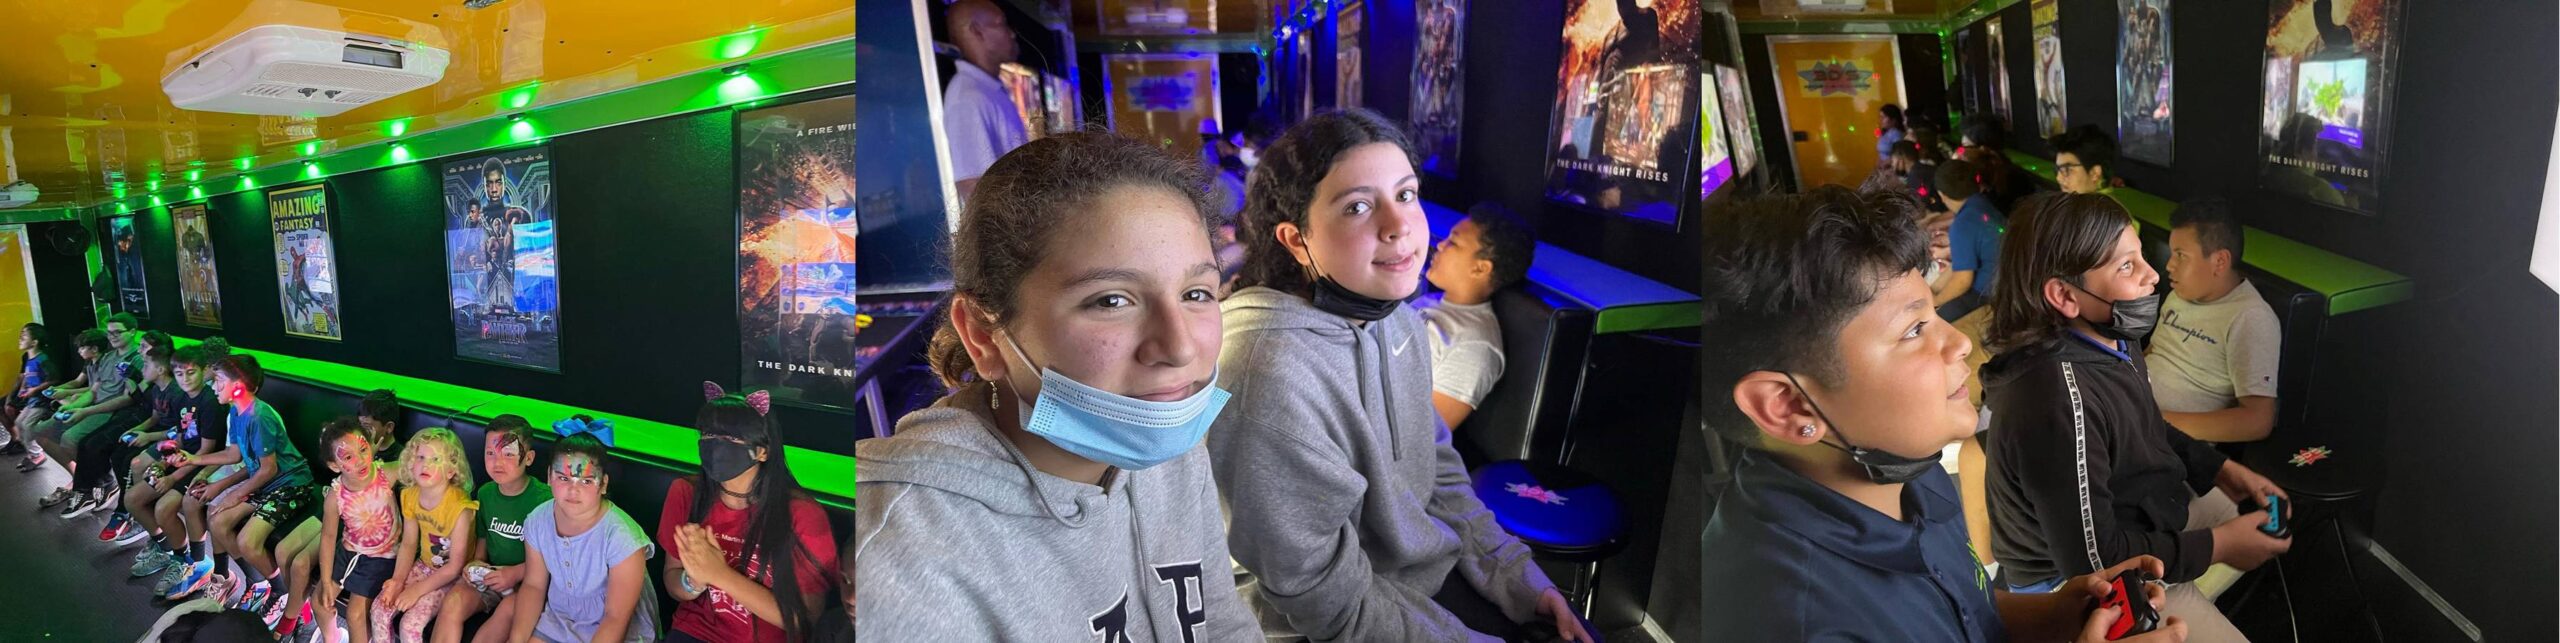 kids at a video game truck party in florida